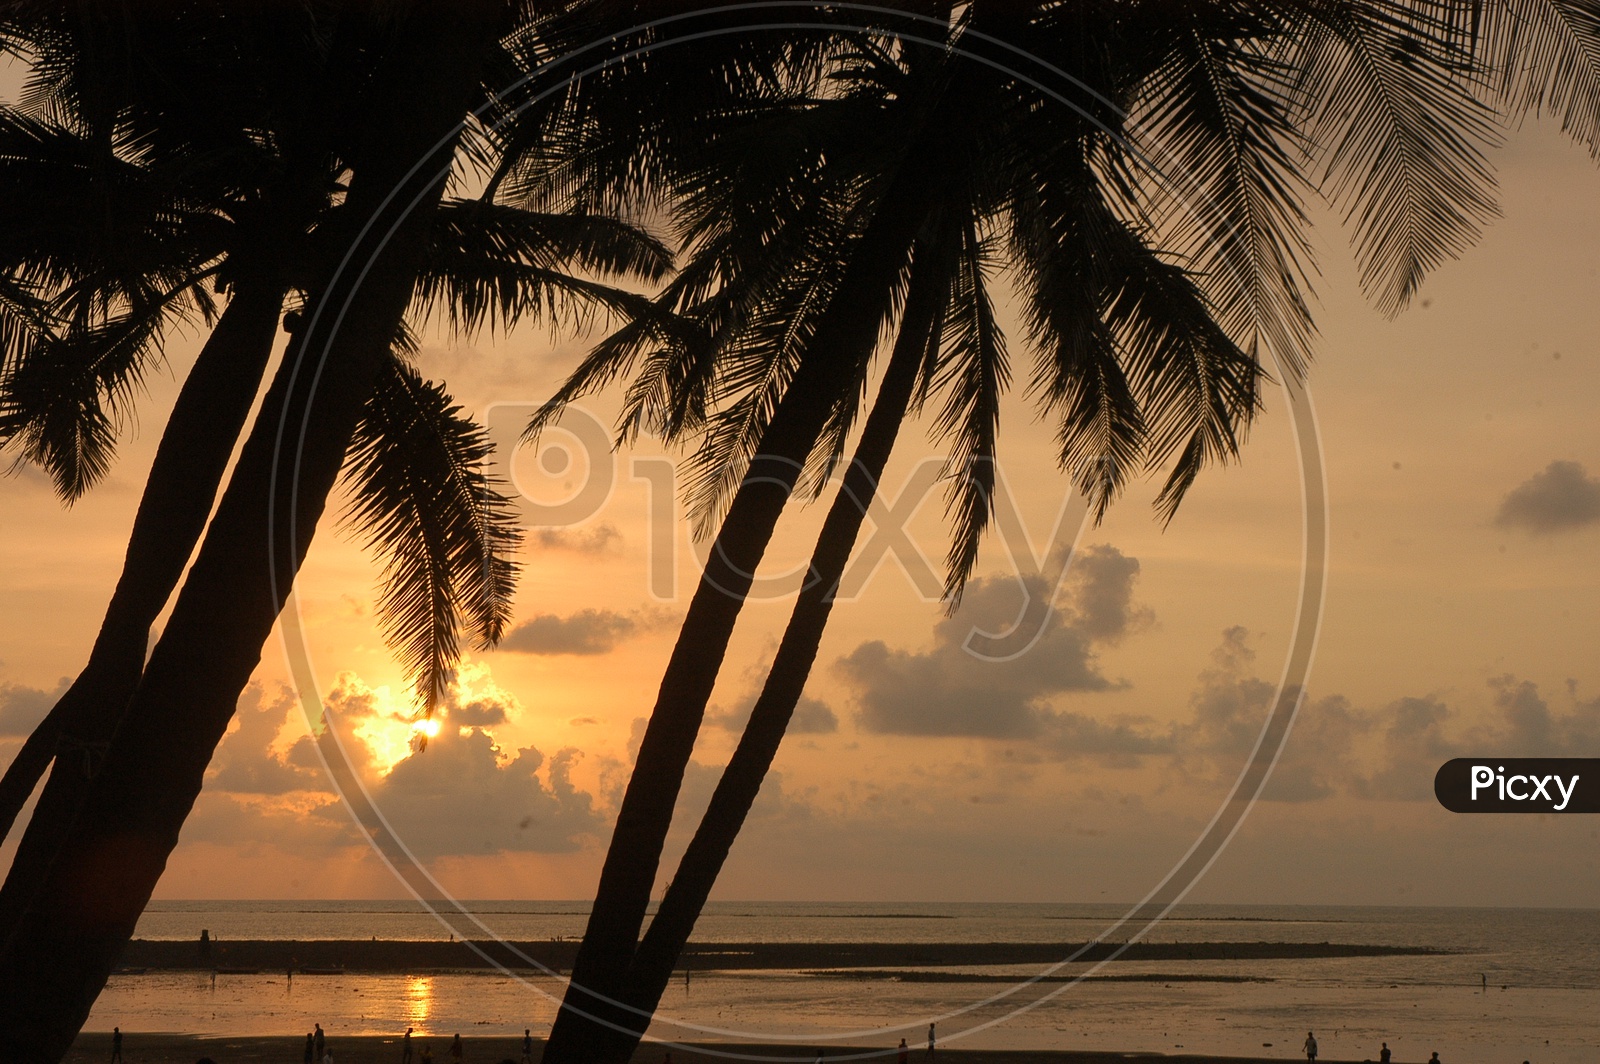 Silhouette of coconut trees during sunrise or sunset near the beach